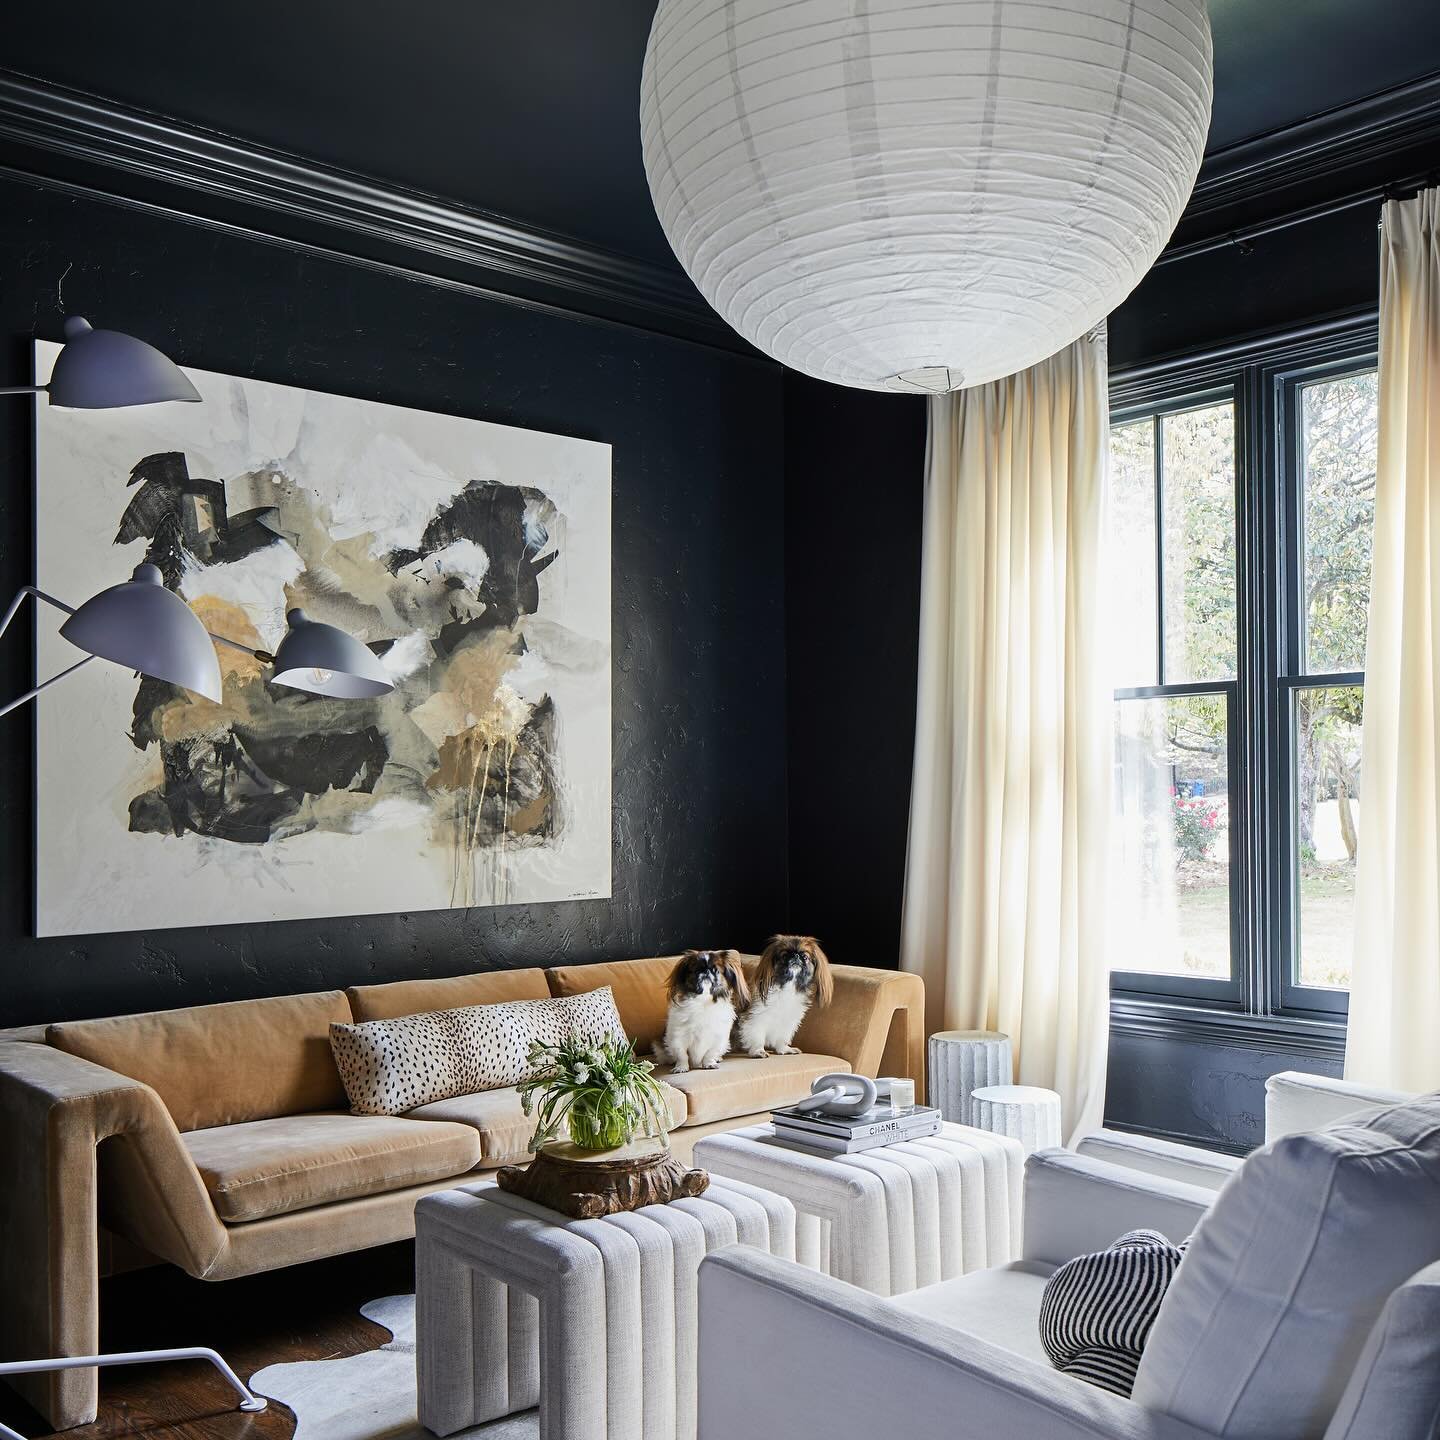 Happy Saturday, friends!

We're excited to share some photos from our &quot;Bonita&quot; project✨

This home was already stunning to begin with, and we were able to enhance it with personal flair and character. 

We introduced a moody, dark paint pal